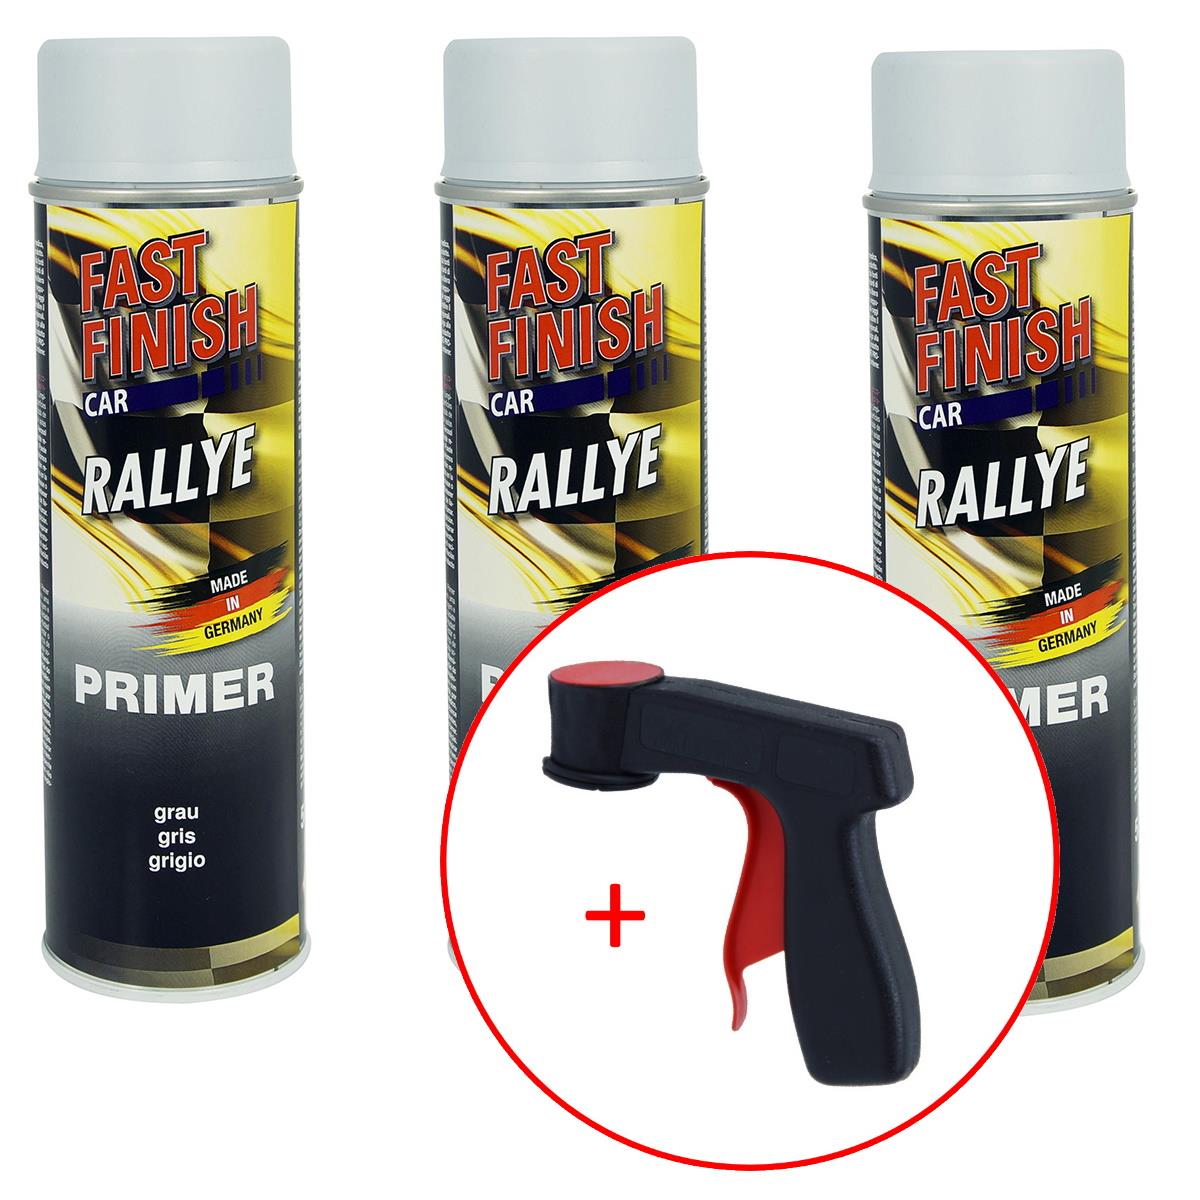 FastFinish Primaire d'adhérence pour rallye Fast Finish gris 3x